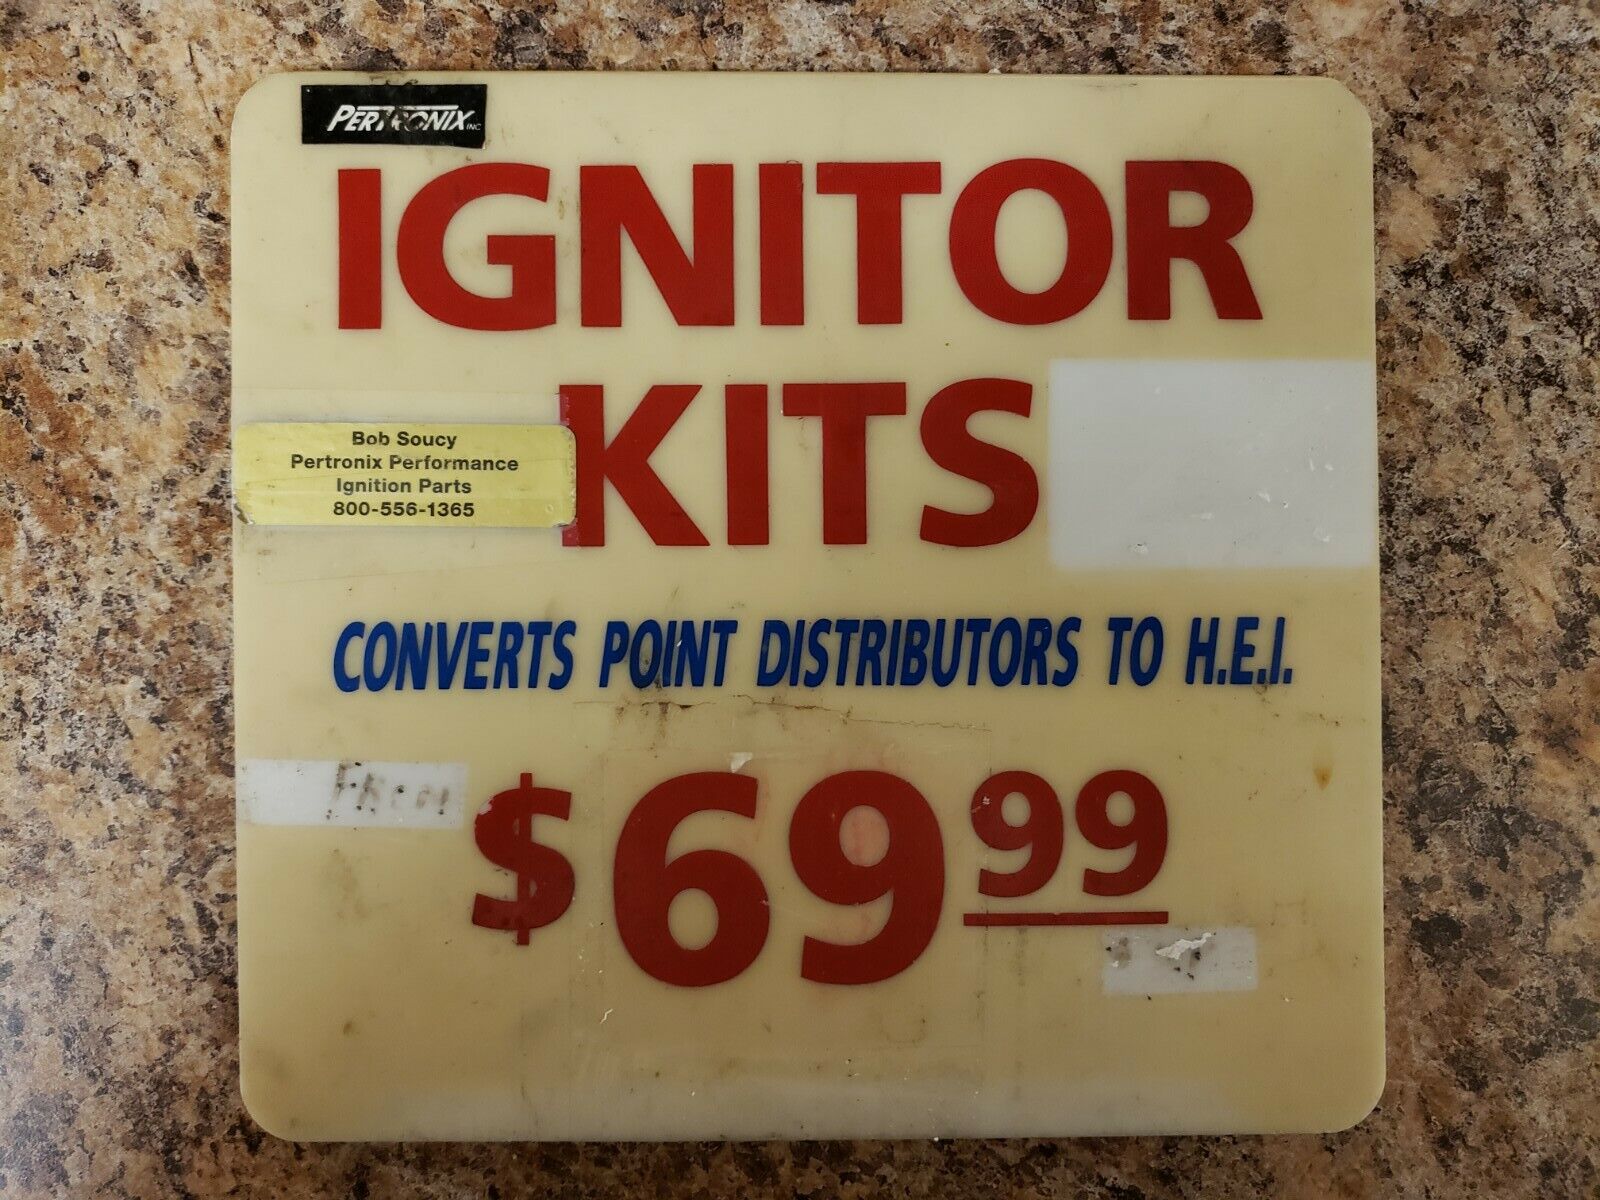 Soucy Pertronix Performance Ignitor Kits Fiberglass Sign 8 3/8 x 7 13/16 Inches